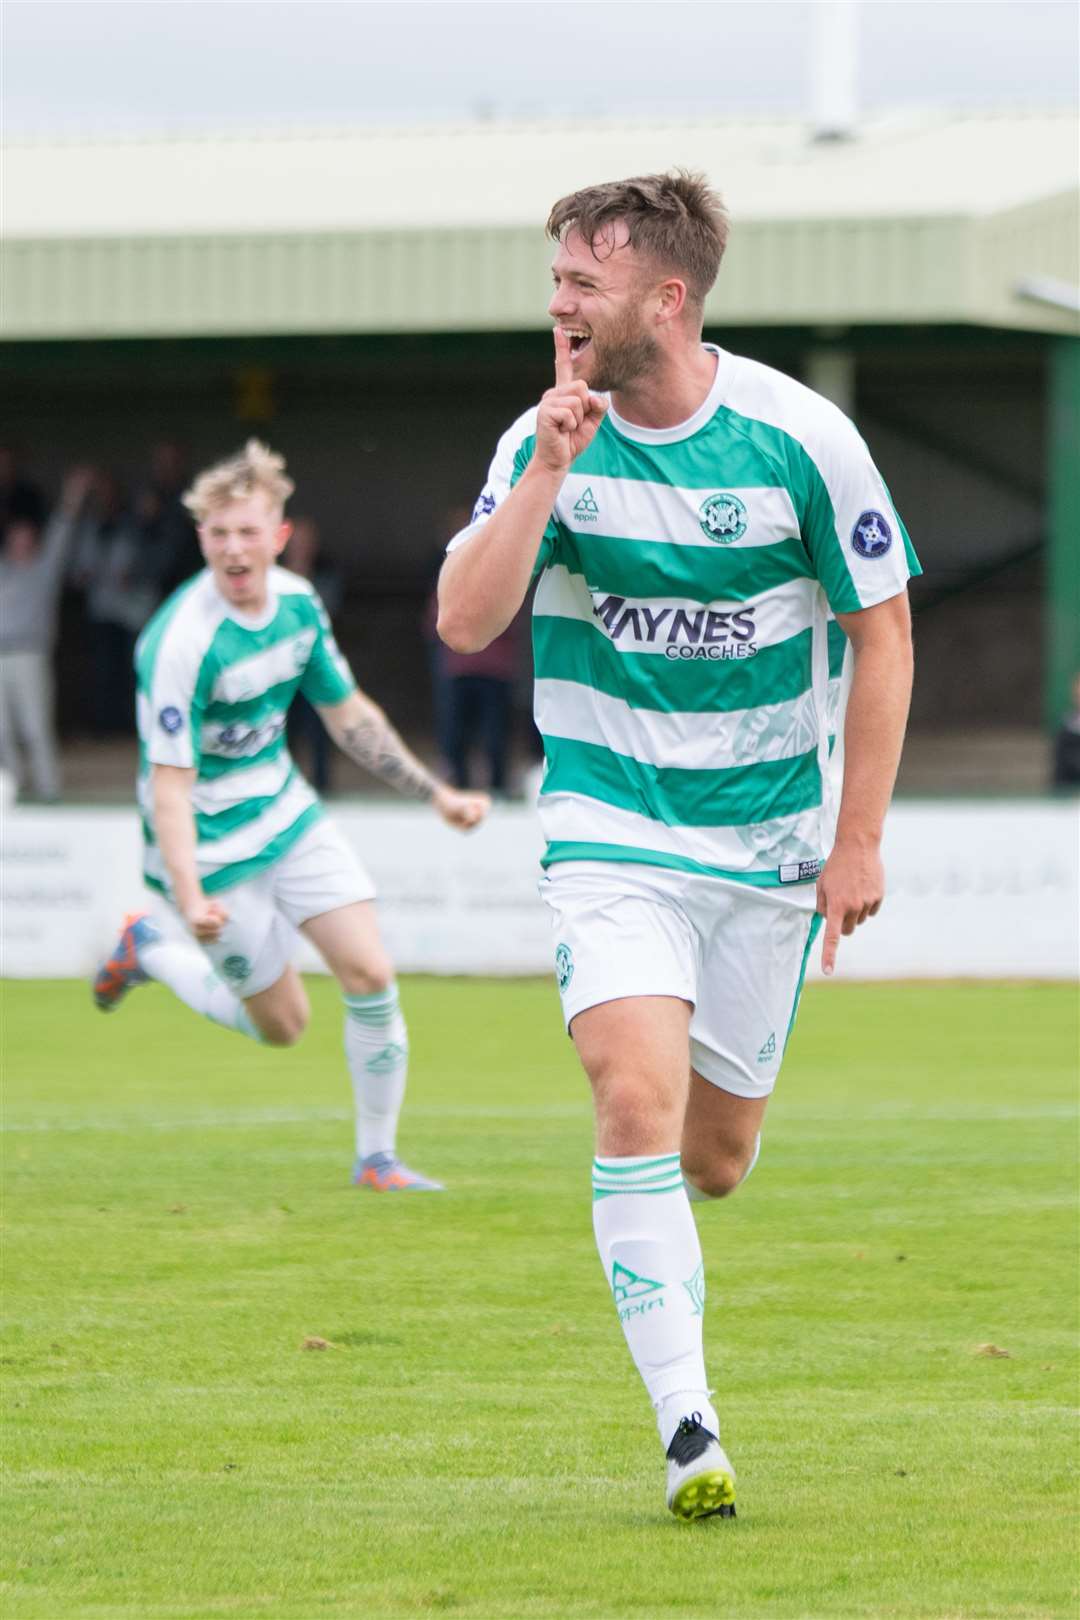 Buckie forward Josh Peters celebrates his first half opener. ..Buckie Thistle FC (6) vs Nairn County FC (0) - Highland Football League 23/24 - Victoria Park, Buckie 30/09/2023...Picture: Daniel Forsyth..